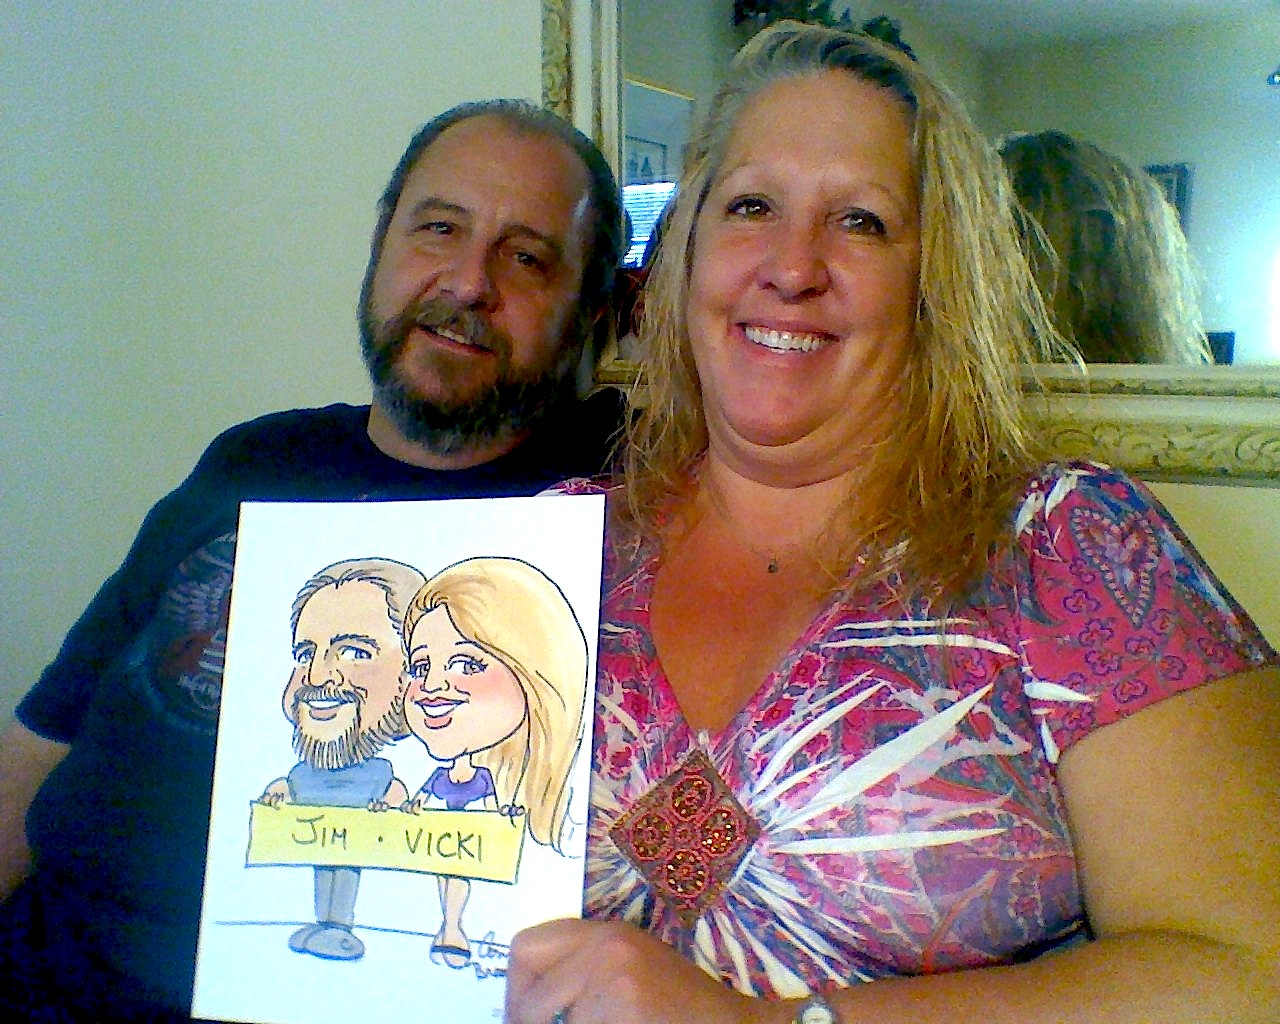 Jim and Vicki's caricature drawing